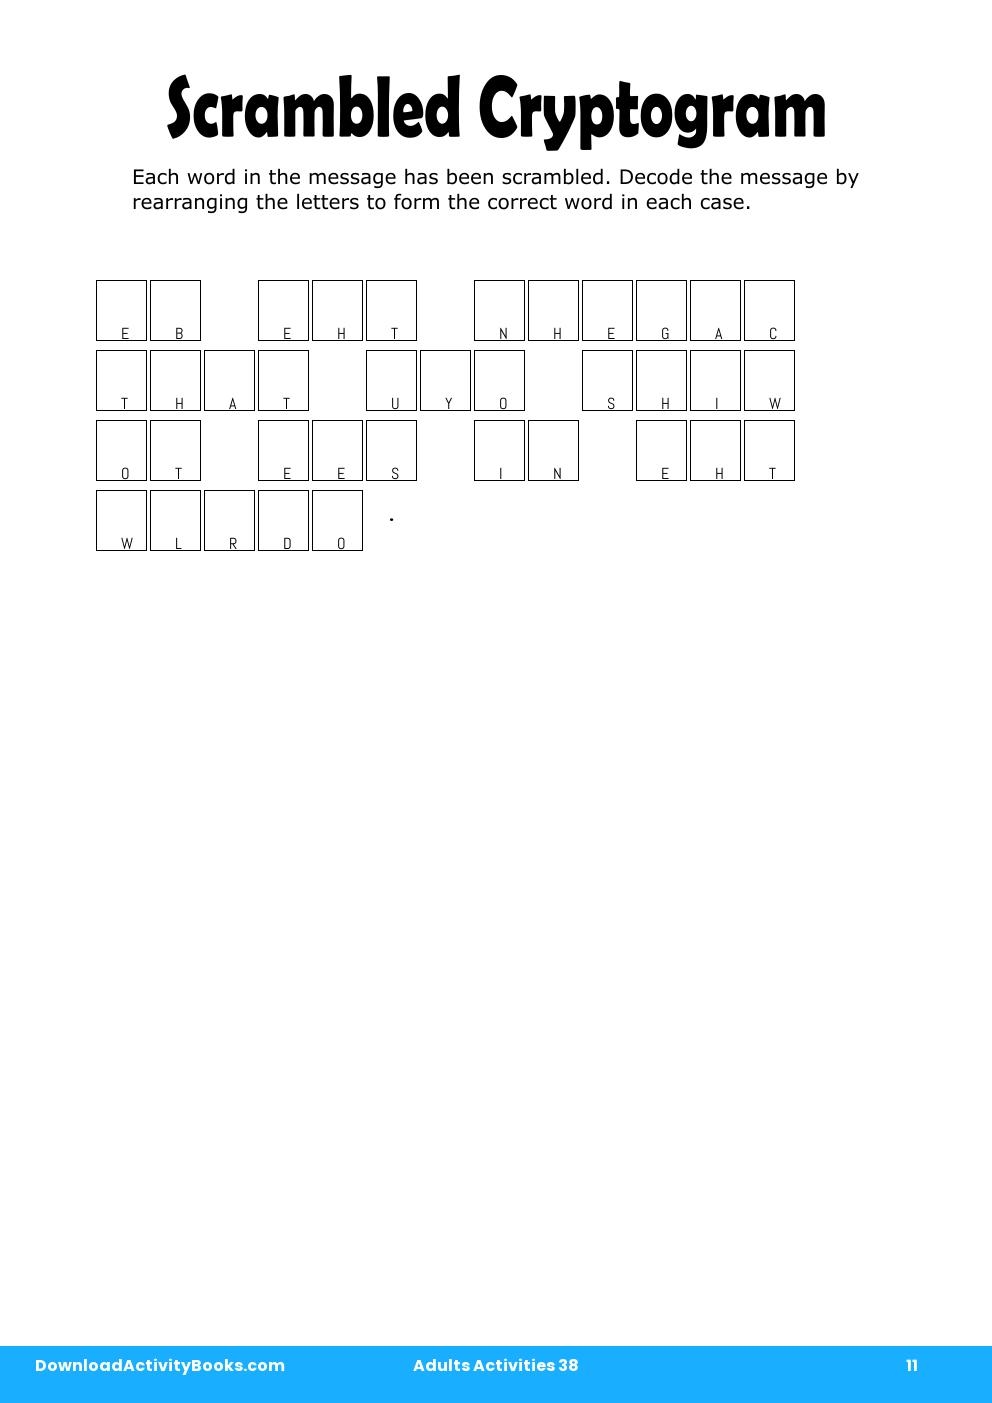 Scrambled Cryptogram in Adults Activities 38